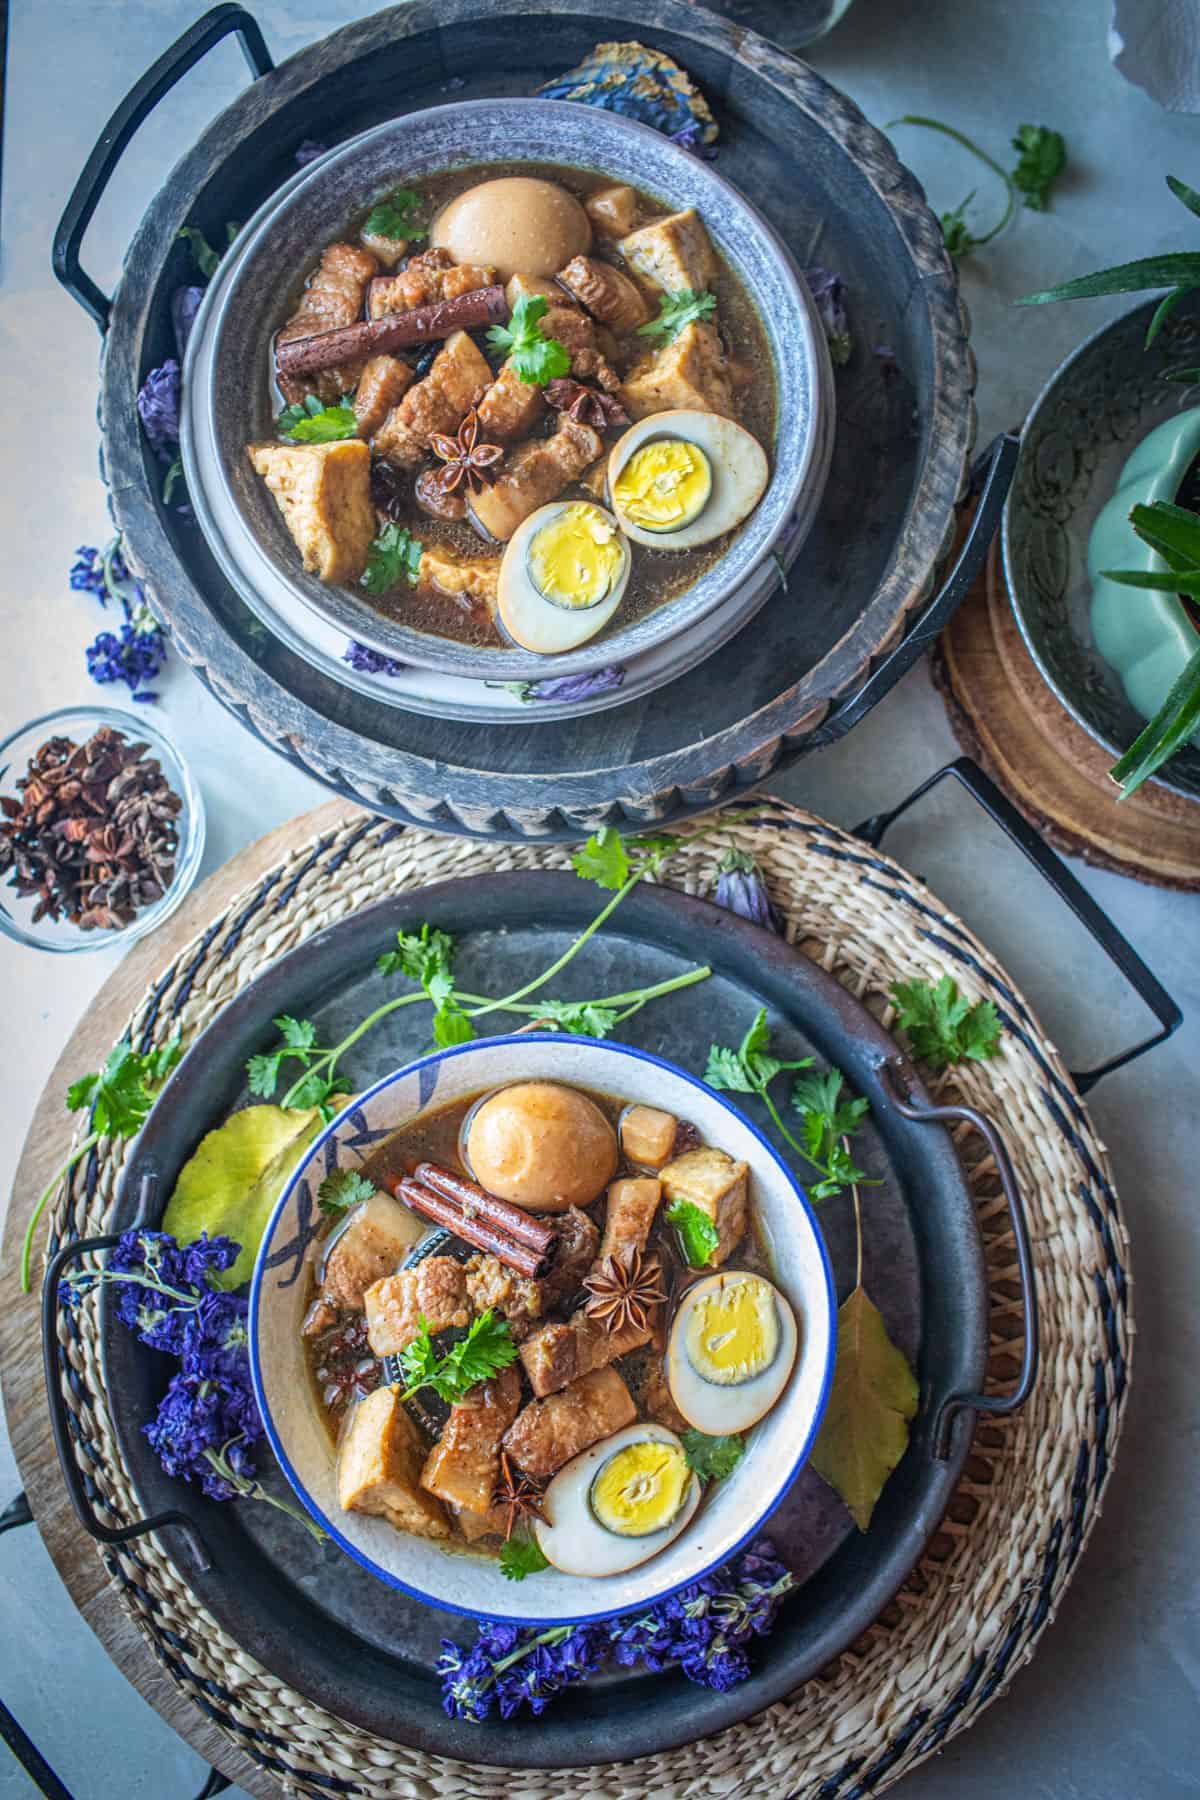 Pork Palo in bowls on the table with flowers and herbs around.